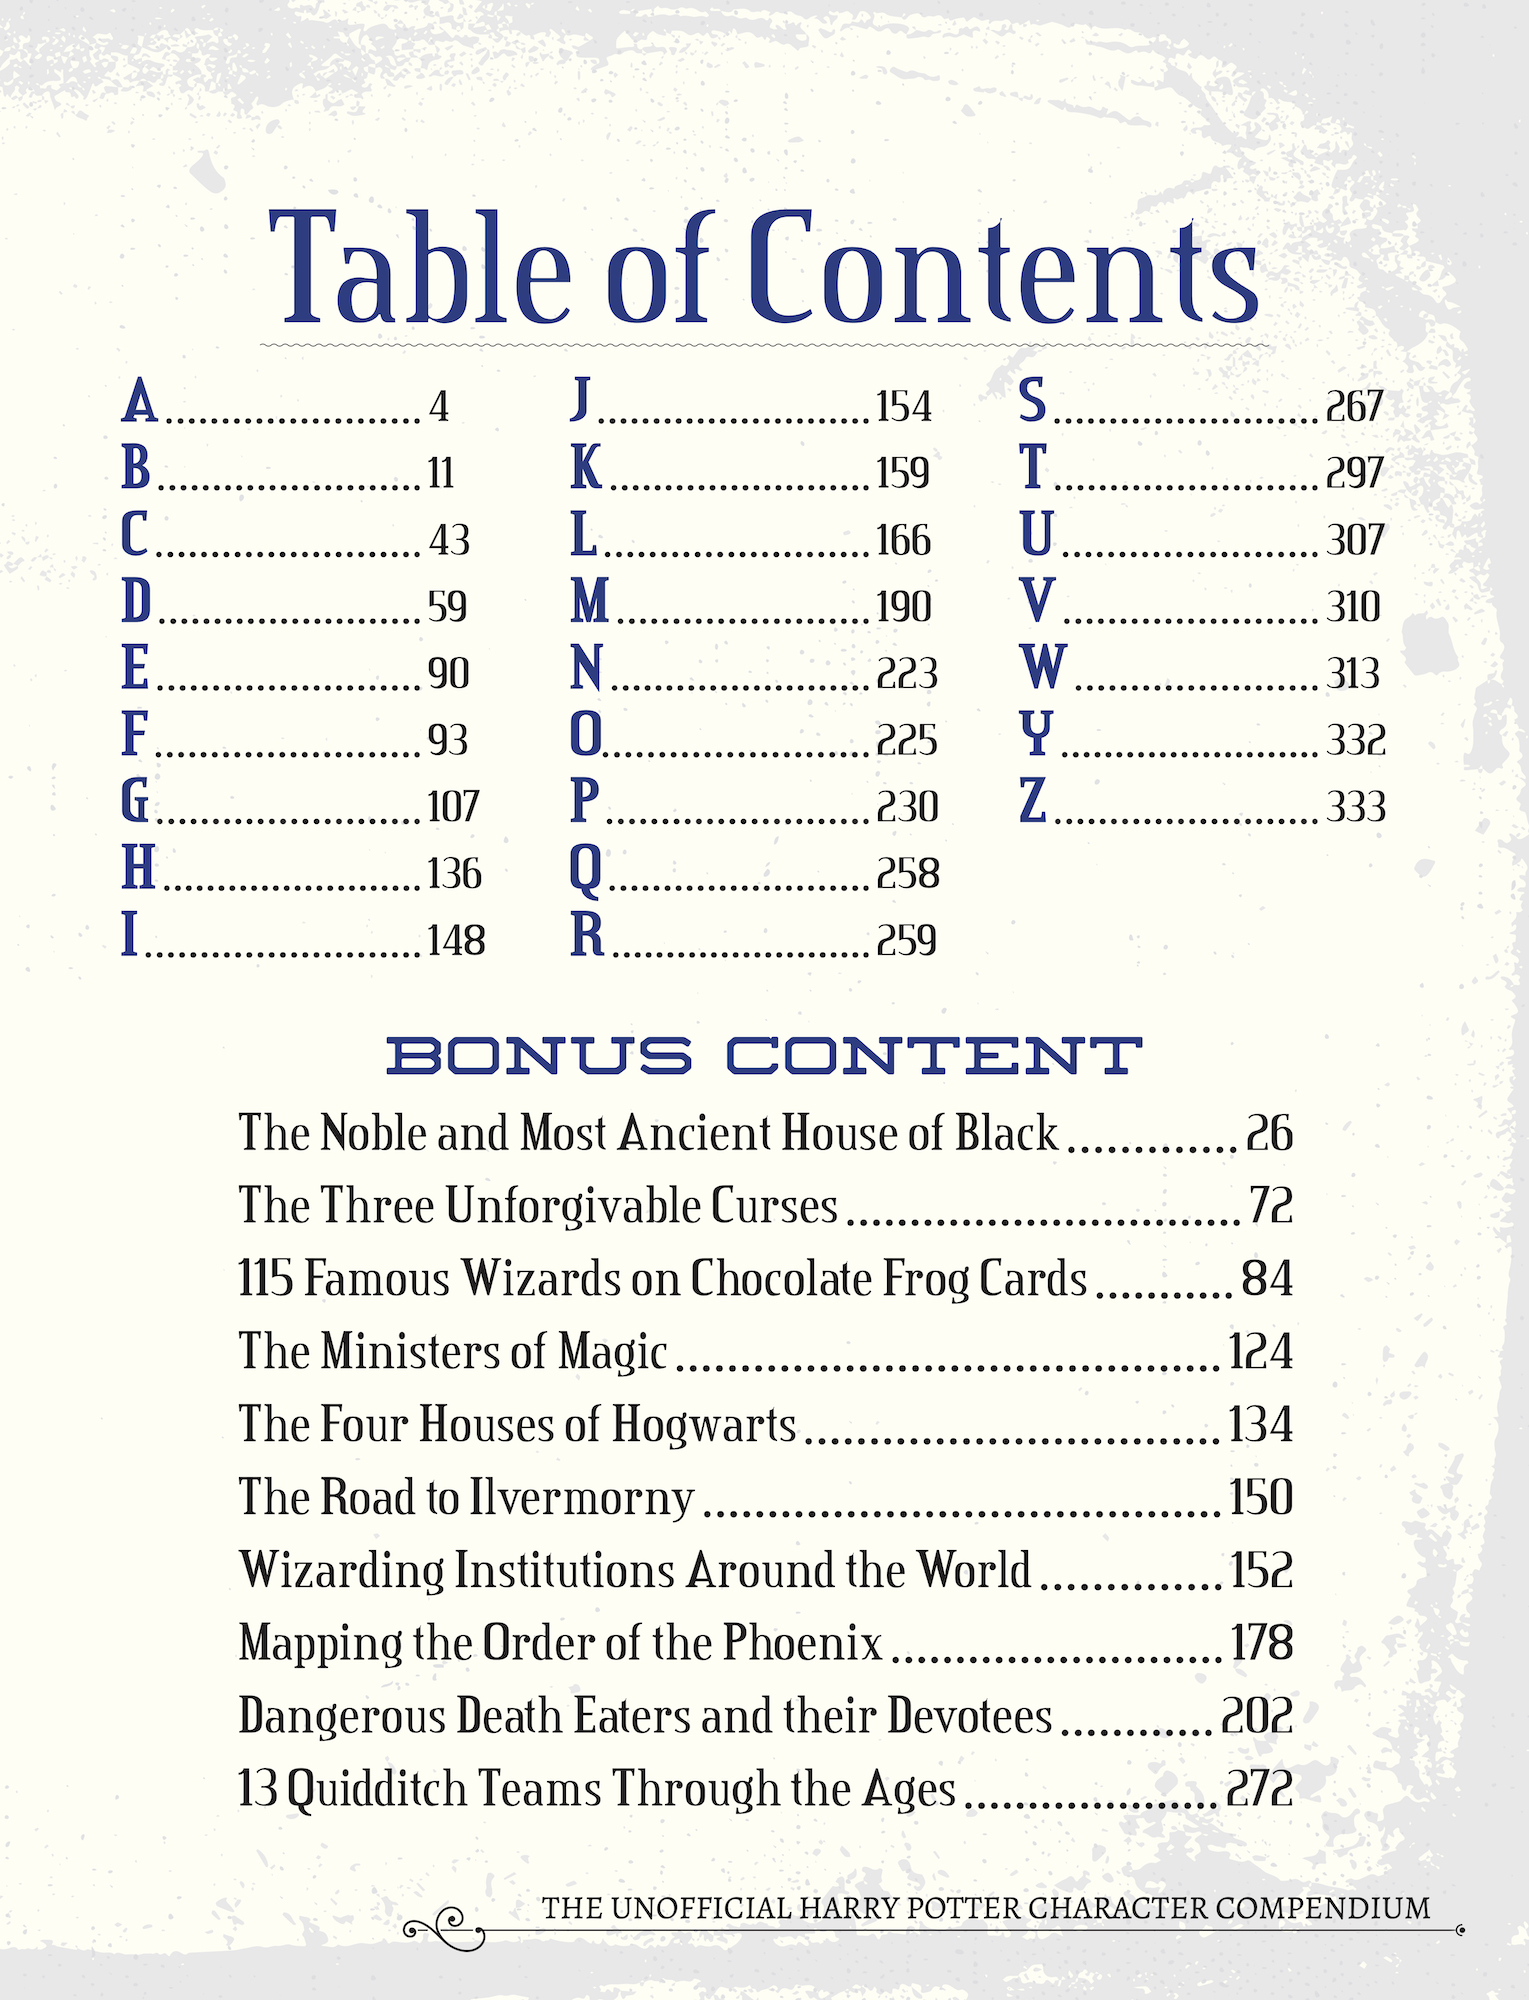 “The Unofficial Harry Potter Character Compendium” table of contents